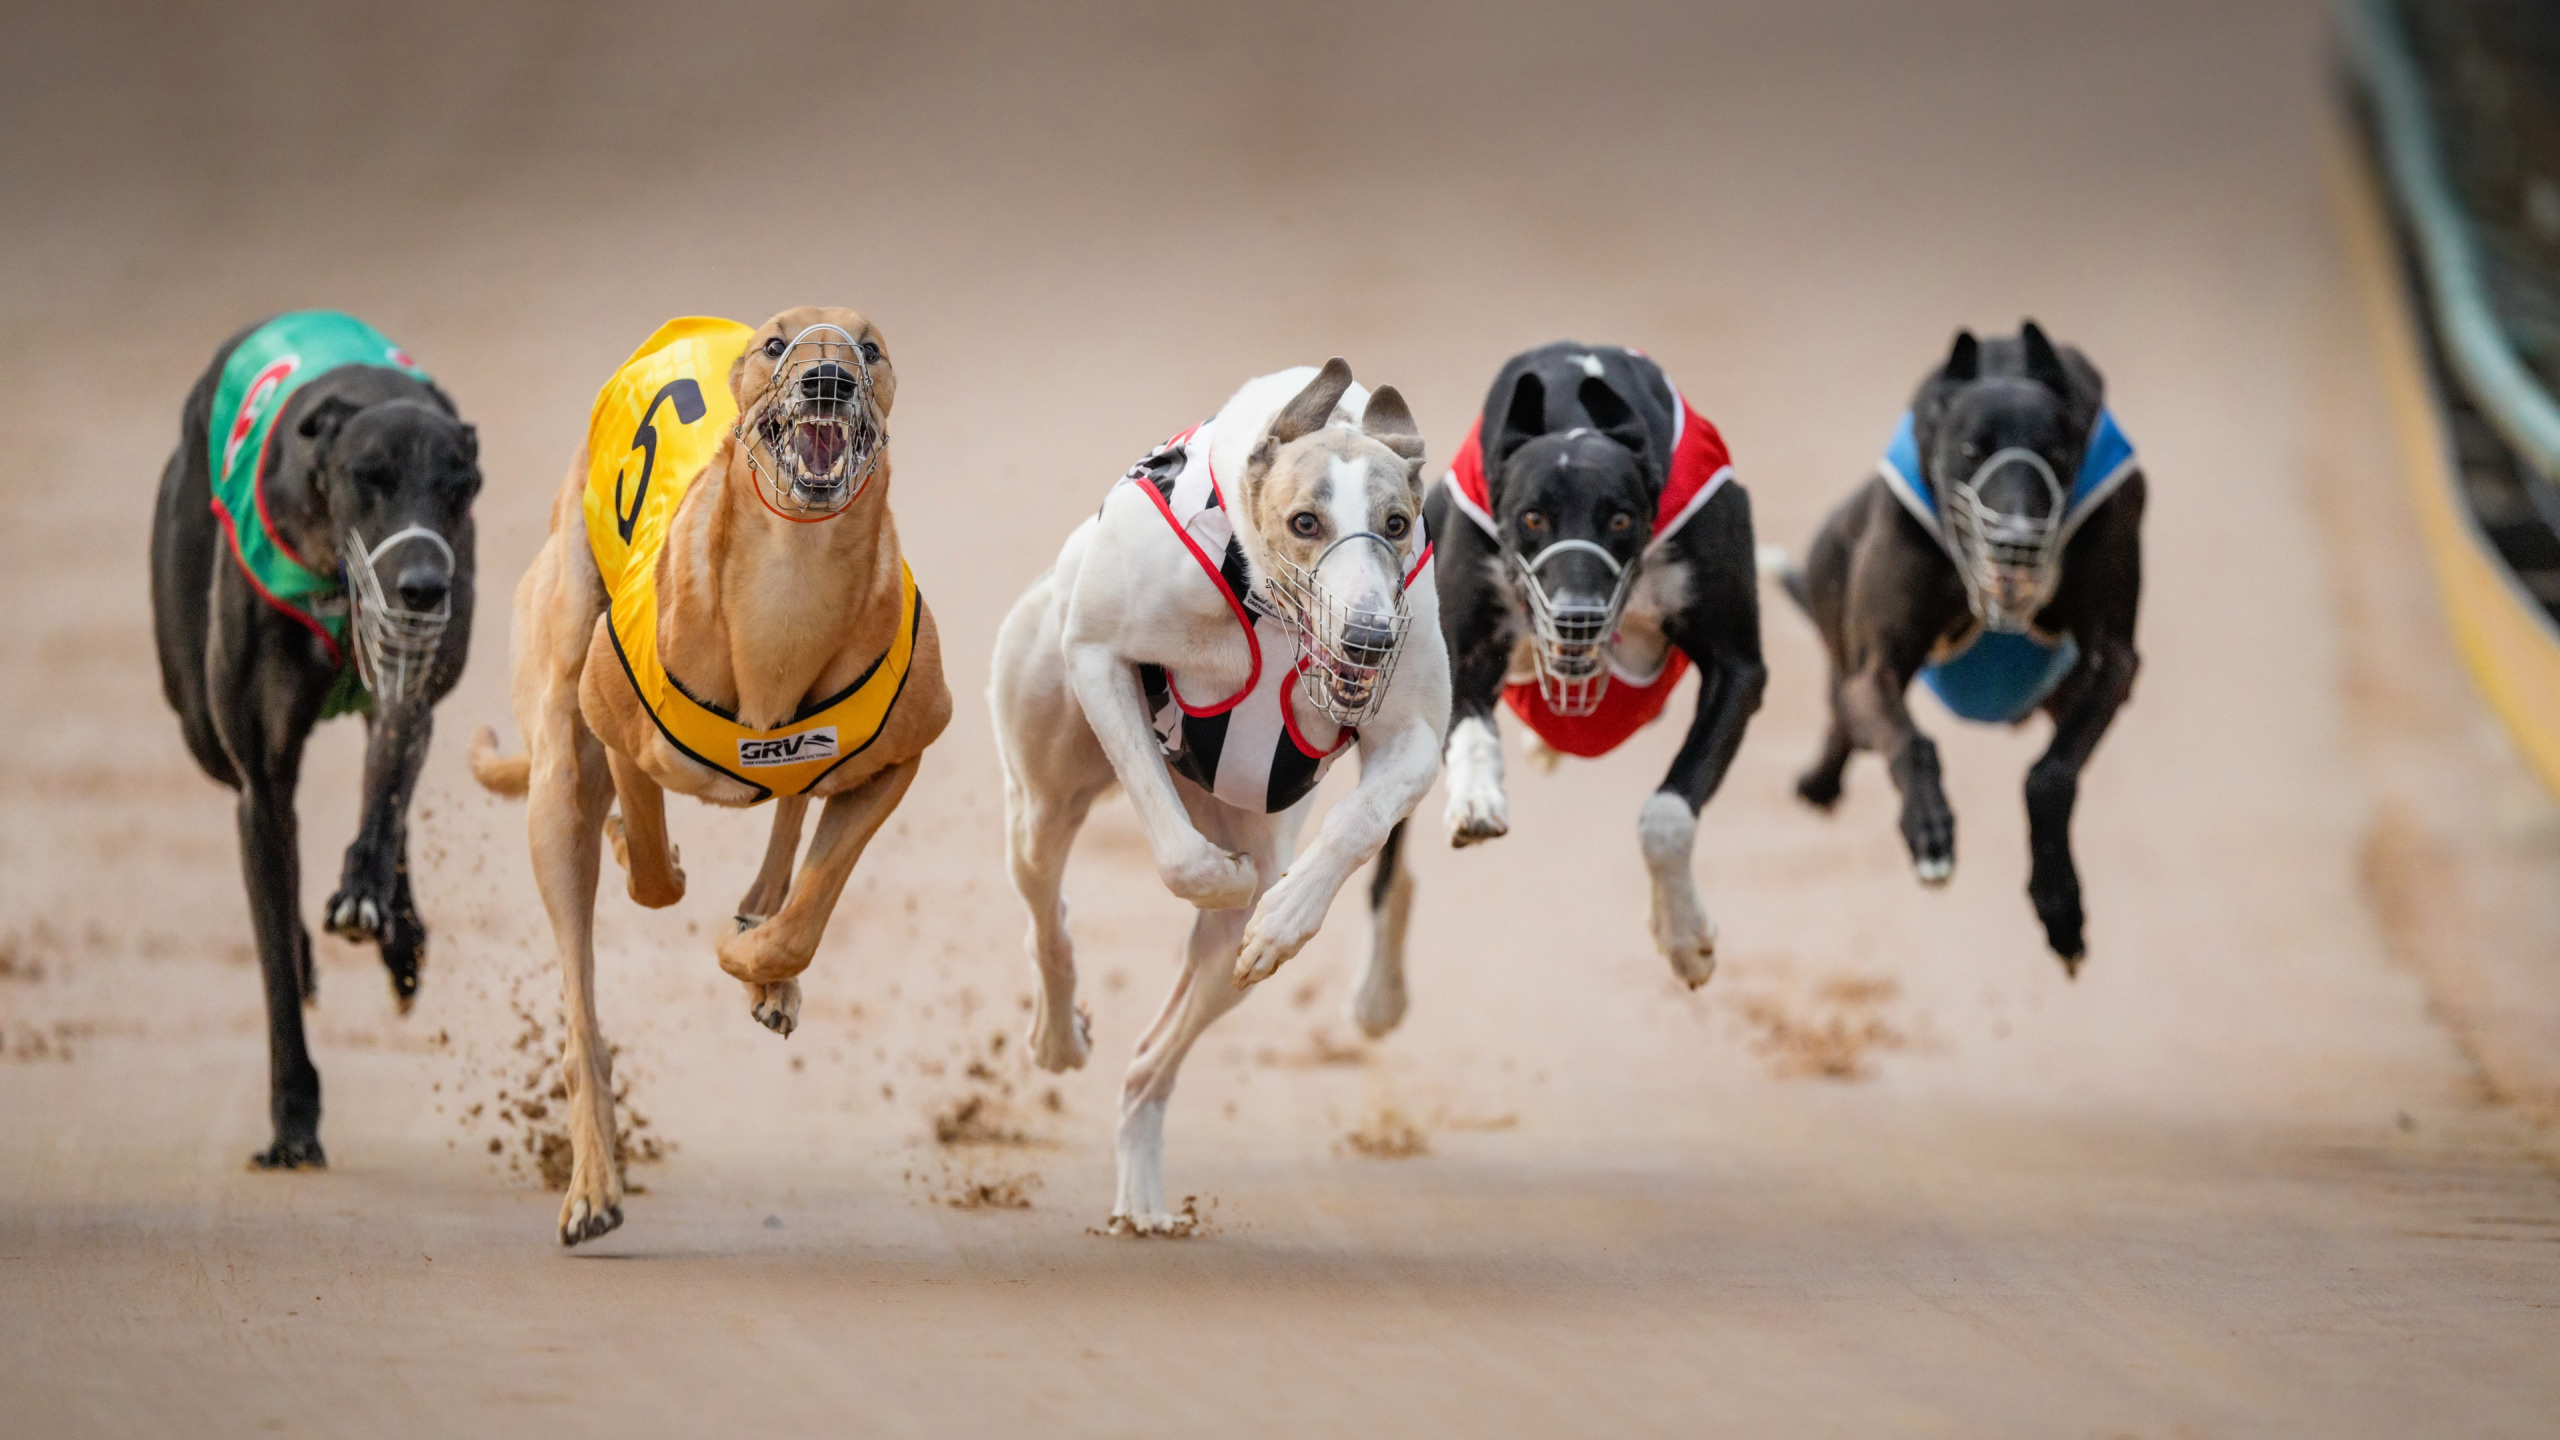 Dog Sports: Race, Essentials, Running Dogs, Muzzles, Collars, Harnesses, Leashes, Pet Supplies. 2560x1440 HD Wallpaper.